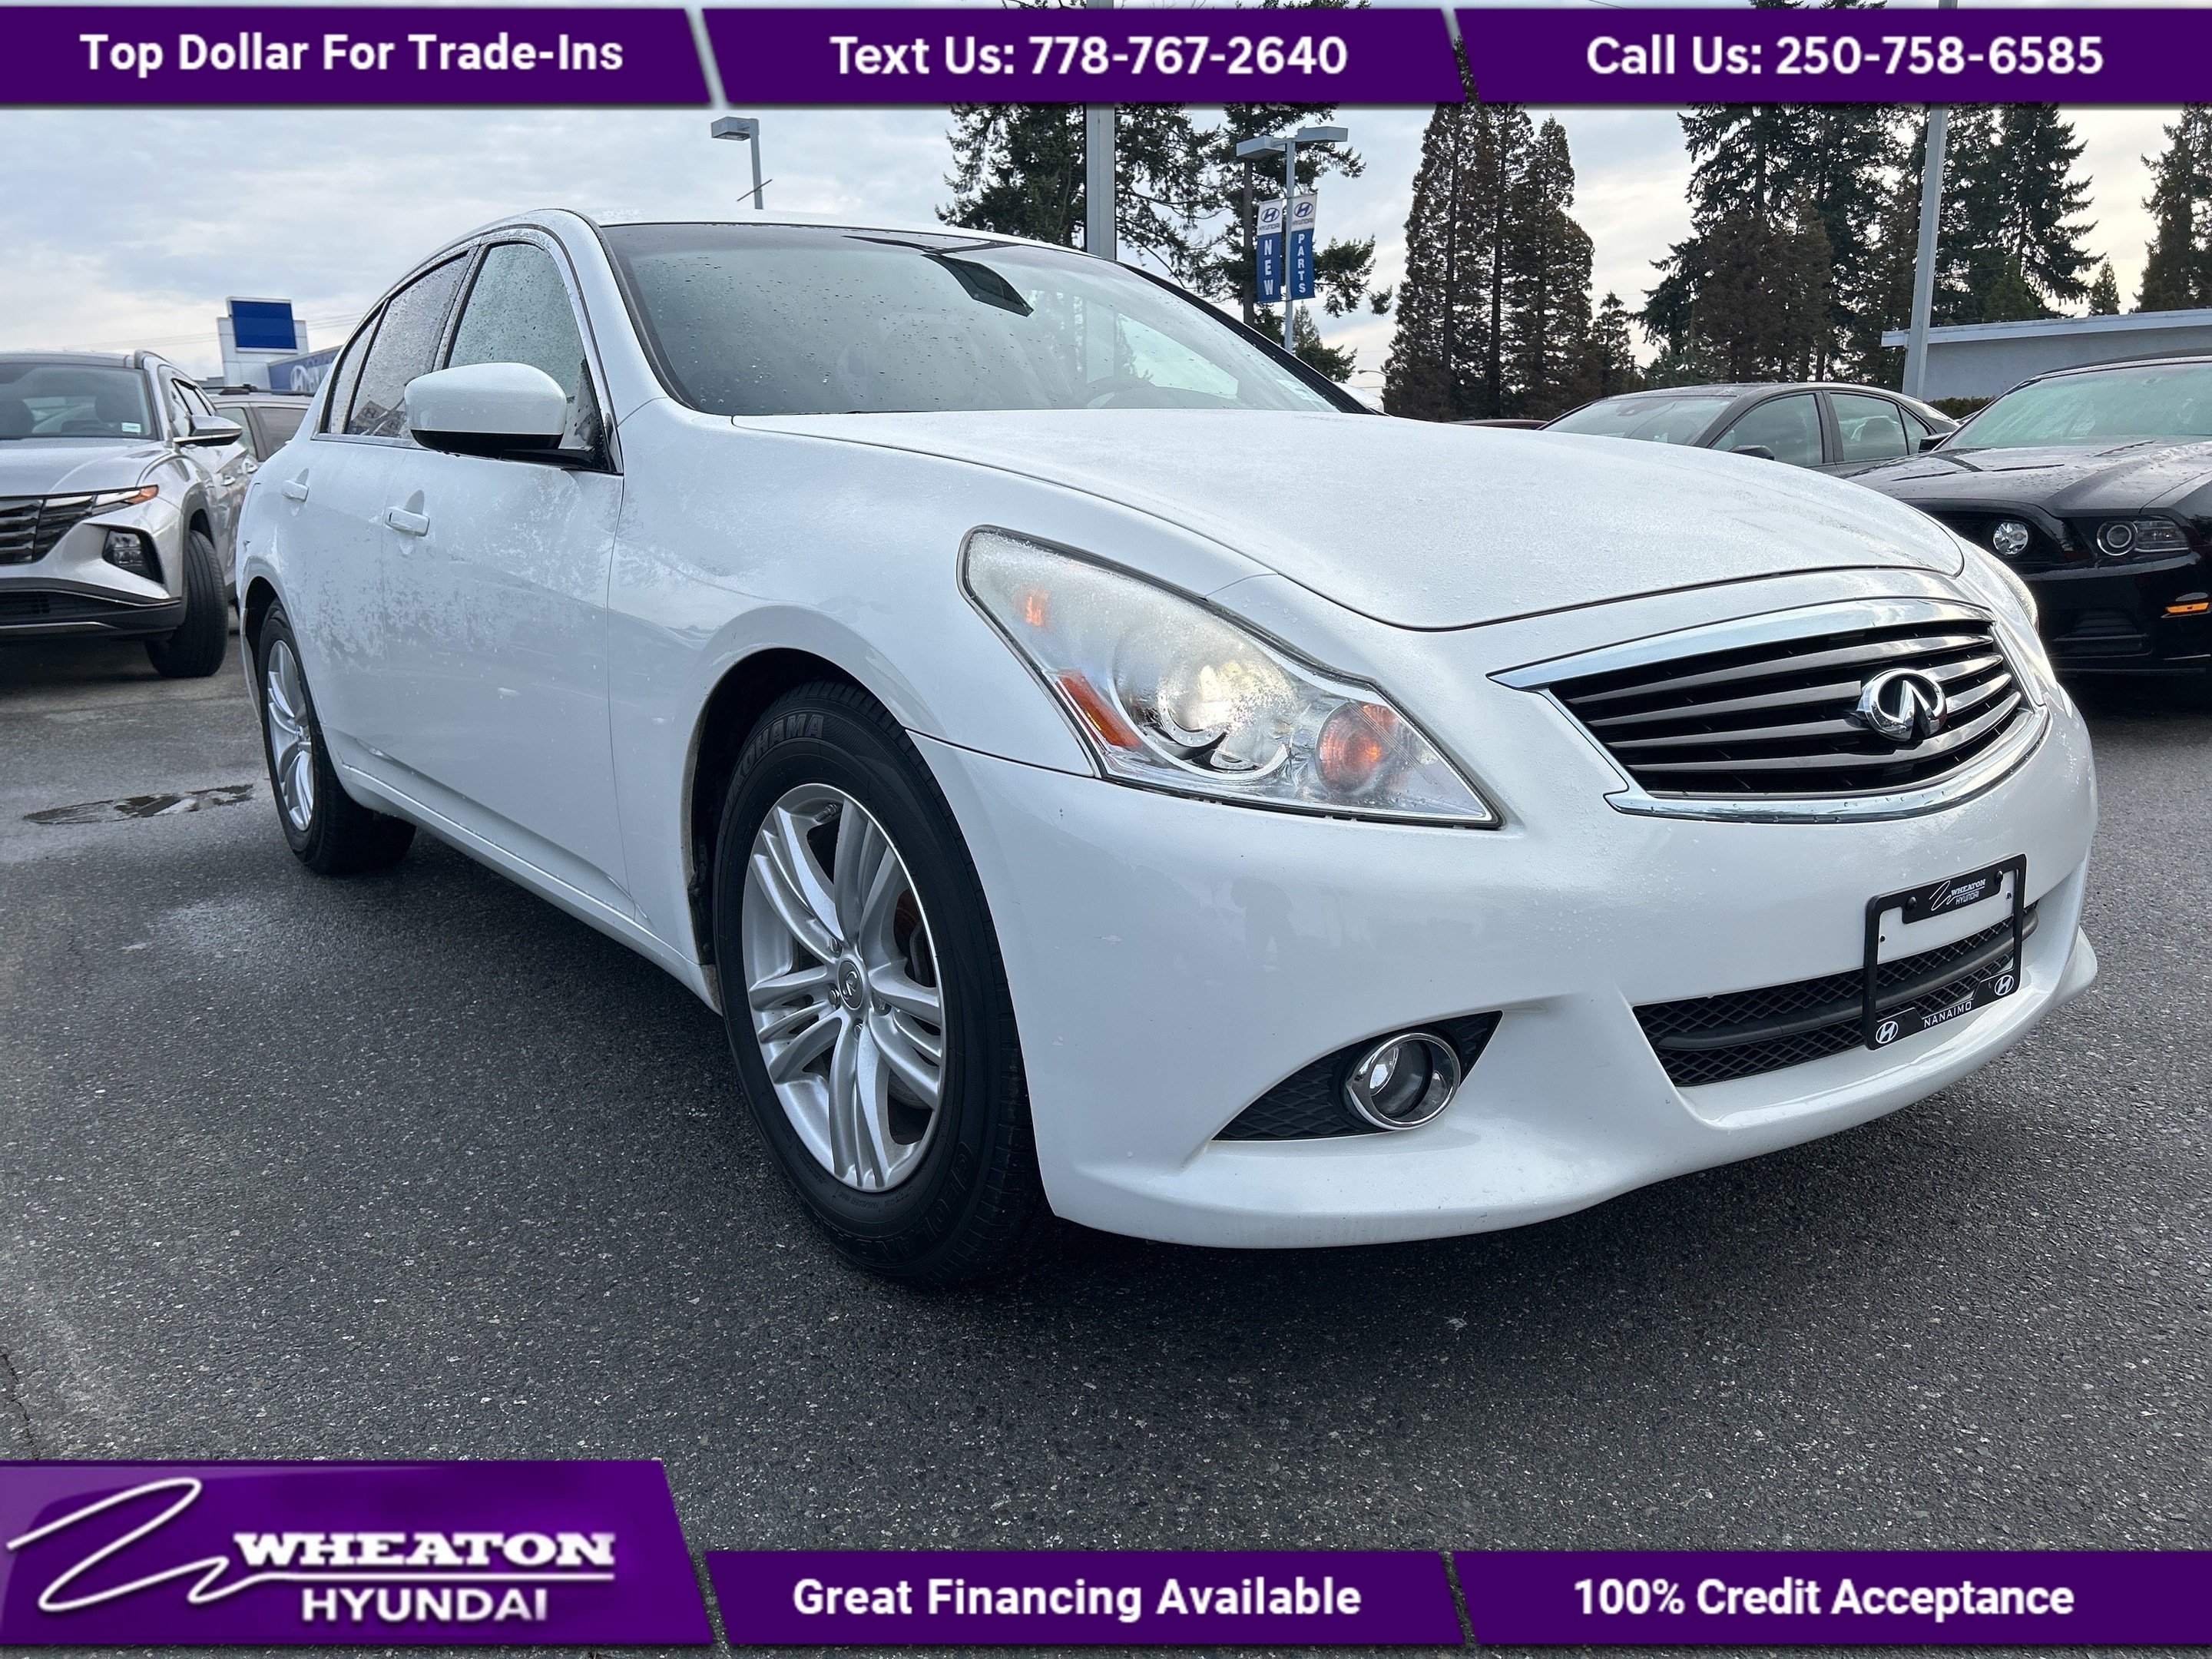 2013 Infiniti G37 Luxury, AWD, No Accidents, Trade in, Leather, Heat